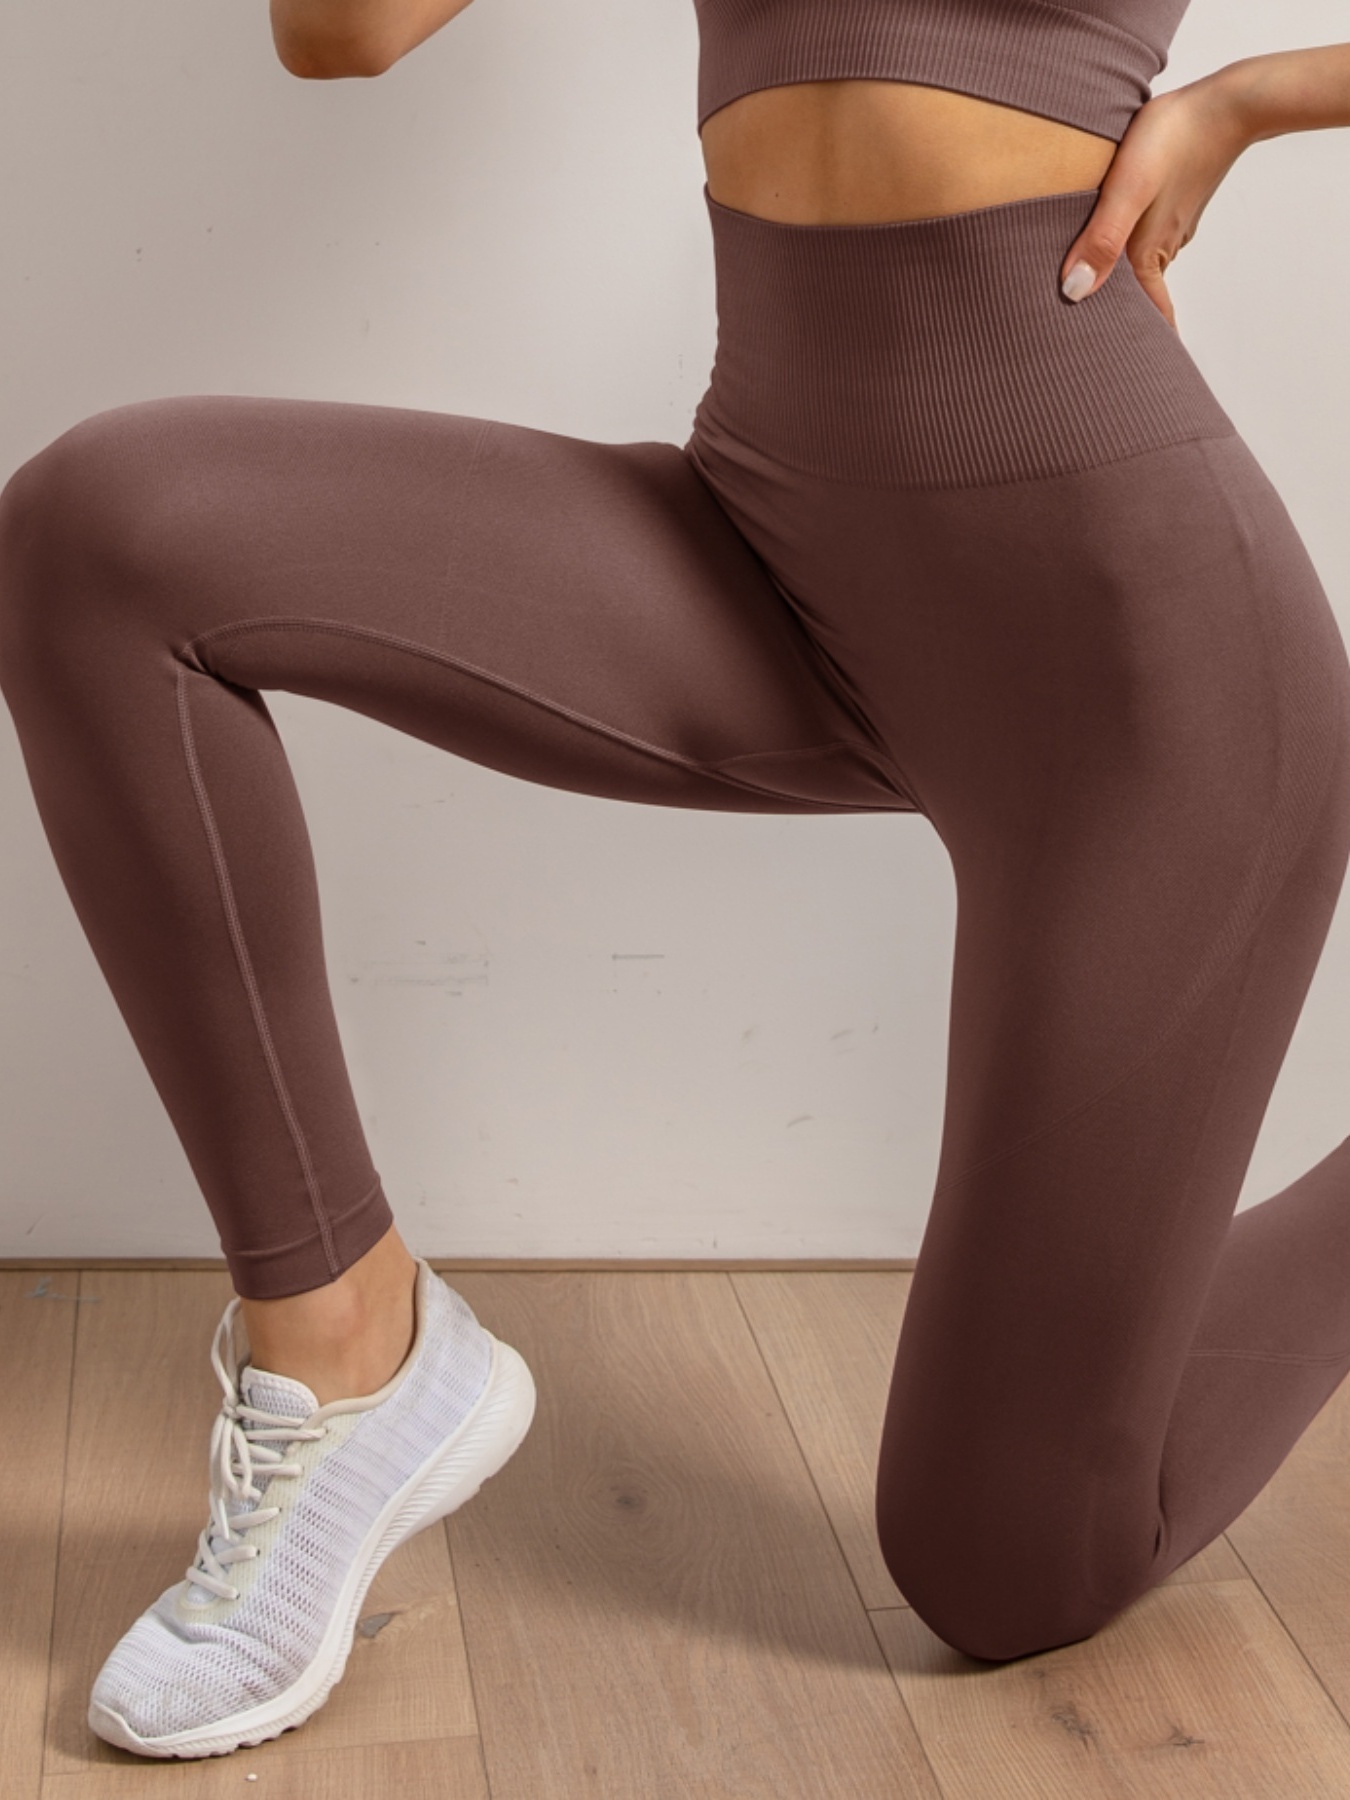 High Waist Yoga Pants for Women - Stretchy and Comfortable Leggings for  Sports and Fitness